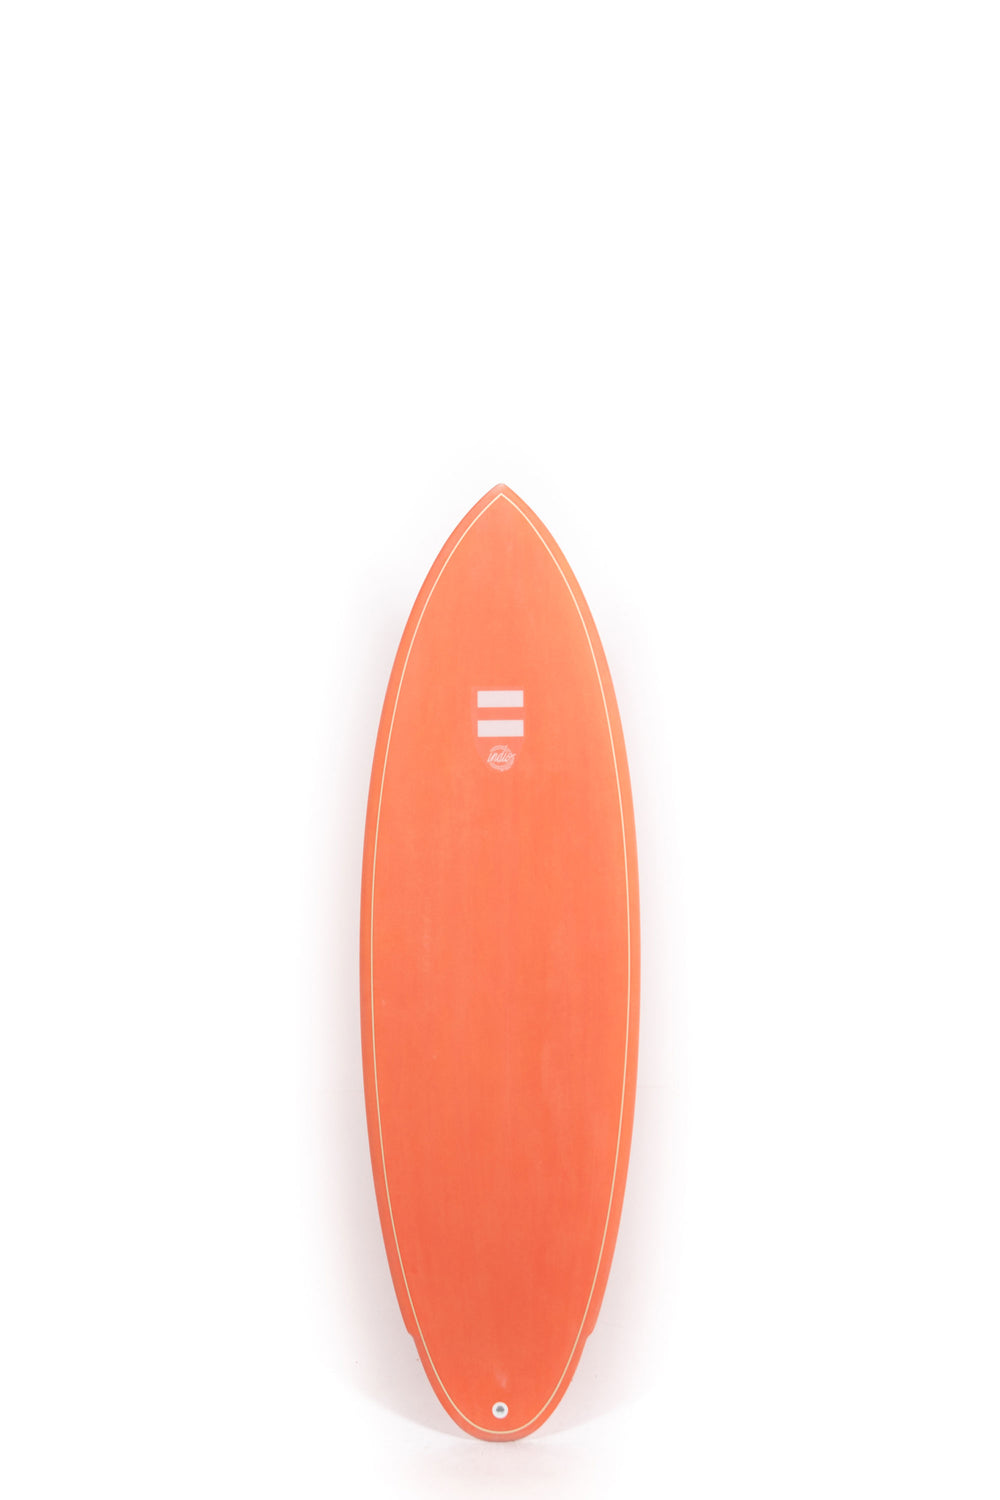 Pukas Surf Shop Indio Surfboards Rancho Red Fall 5'10